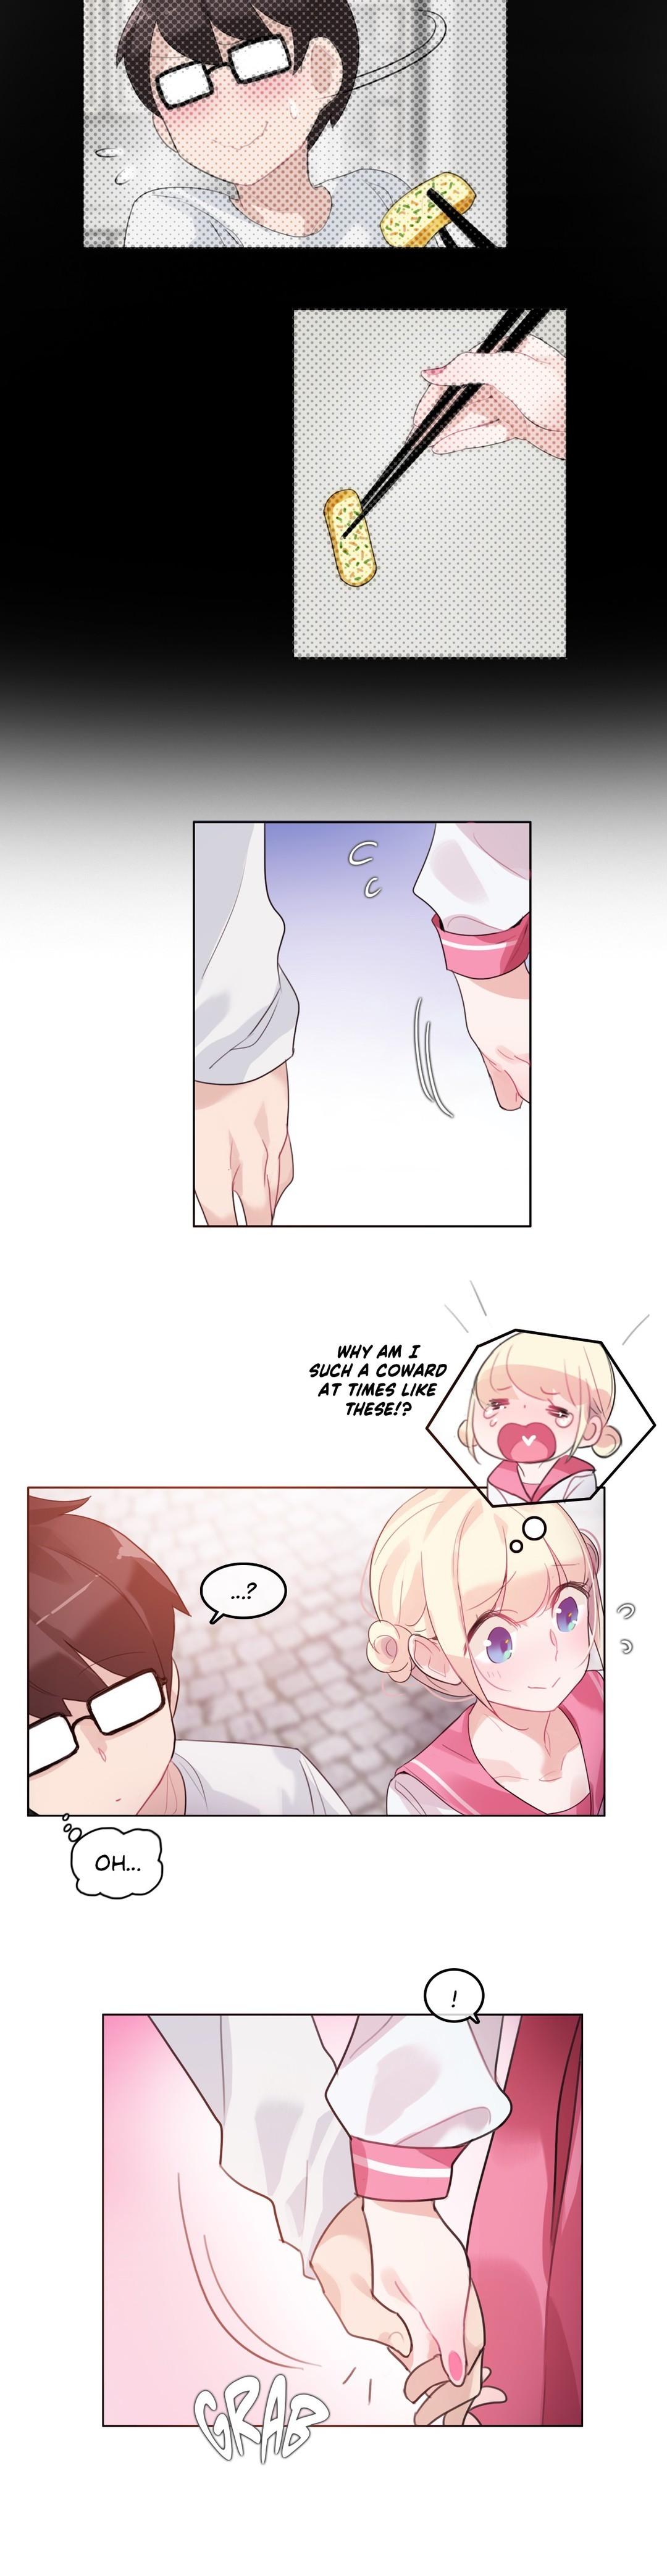 A Pervert's Daily Life Ch. 1-34 648